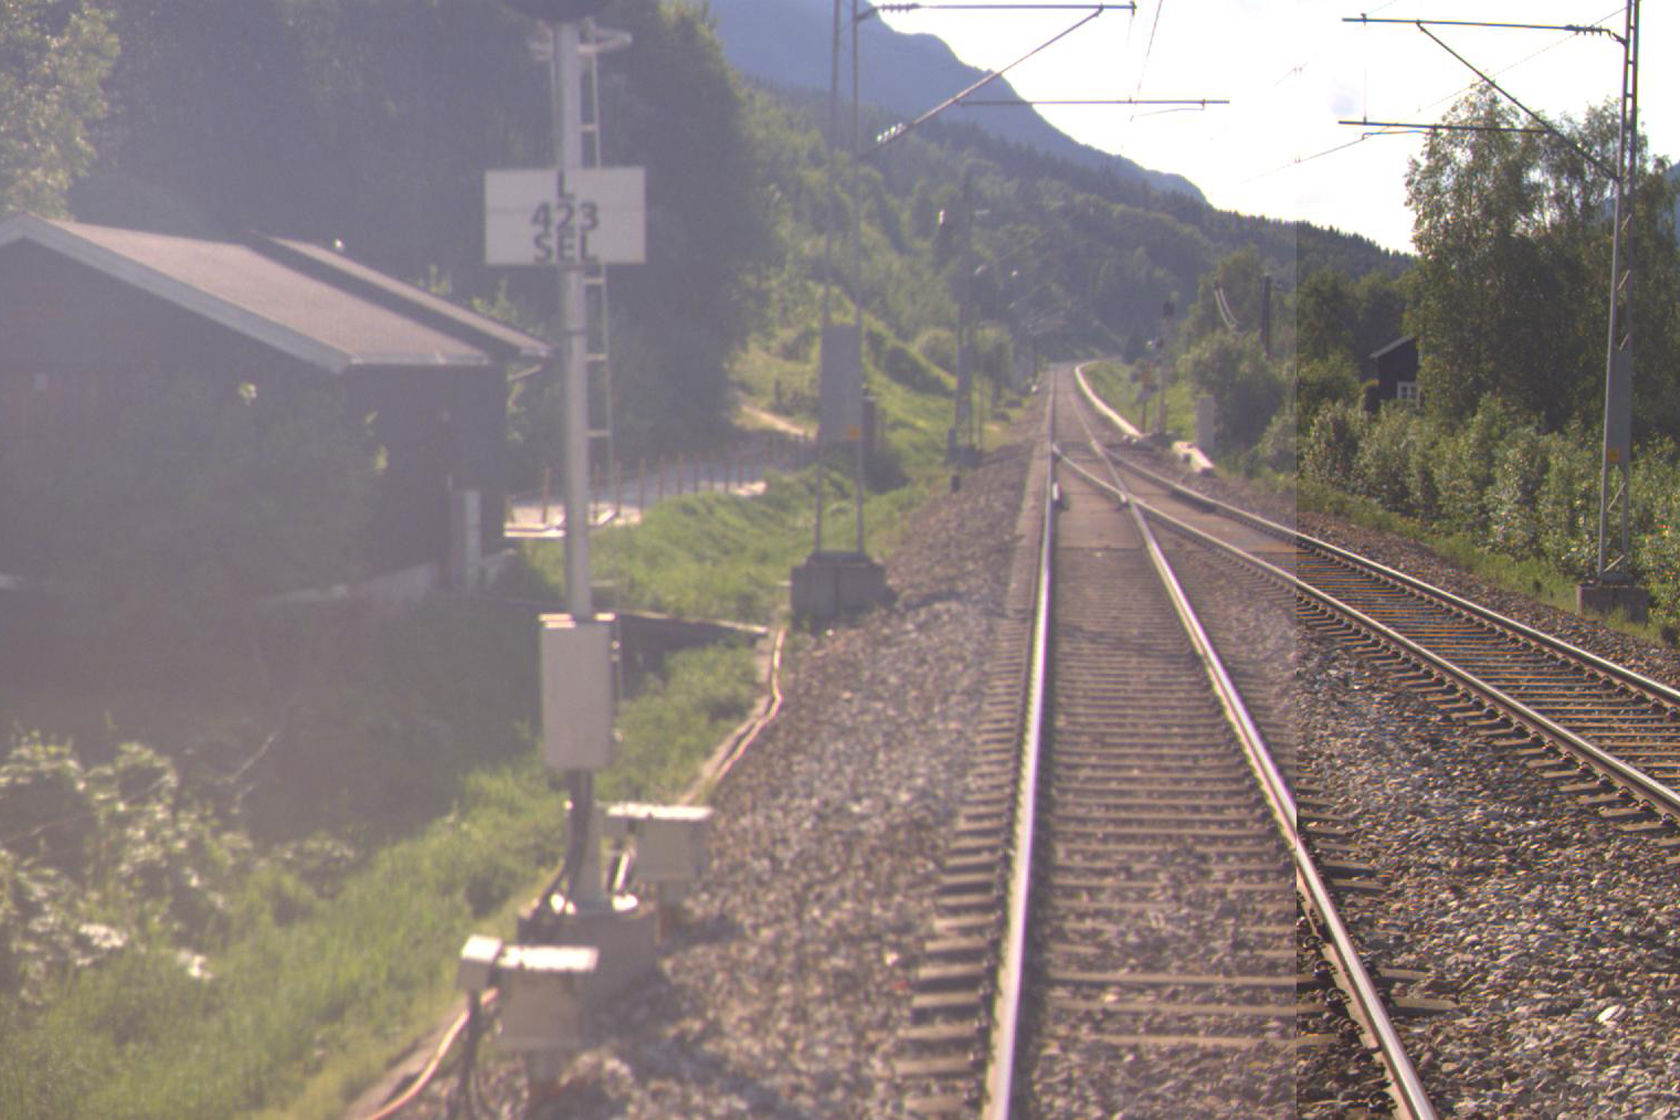 Tracks and building at Sel station